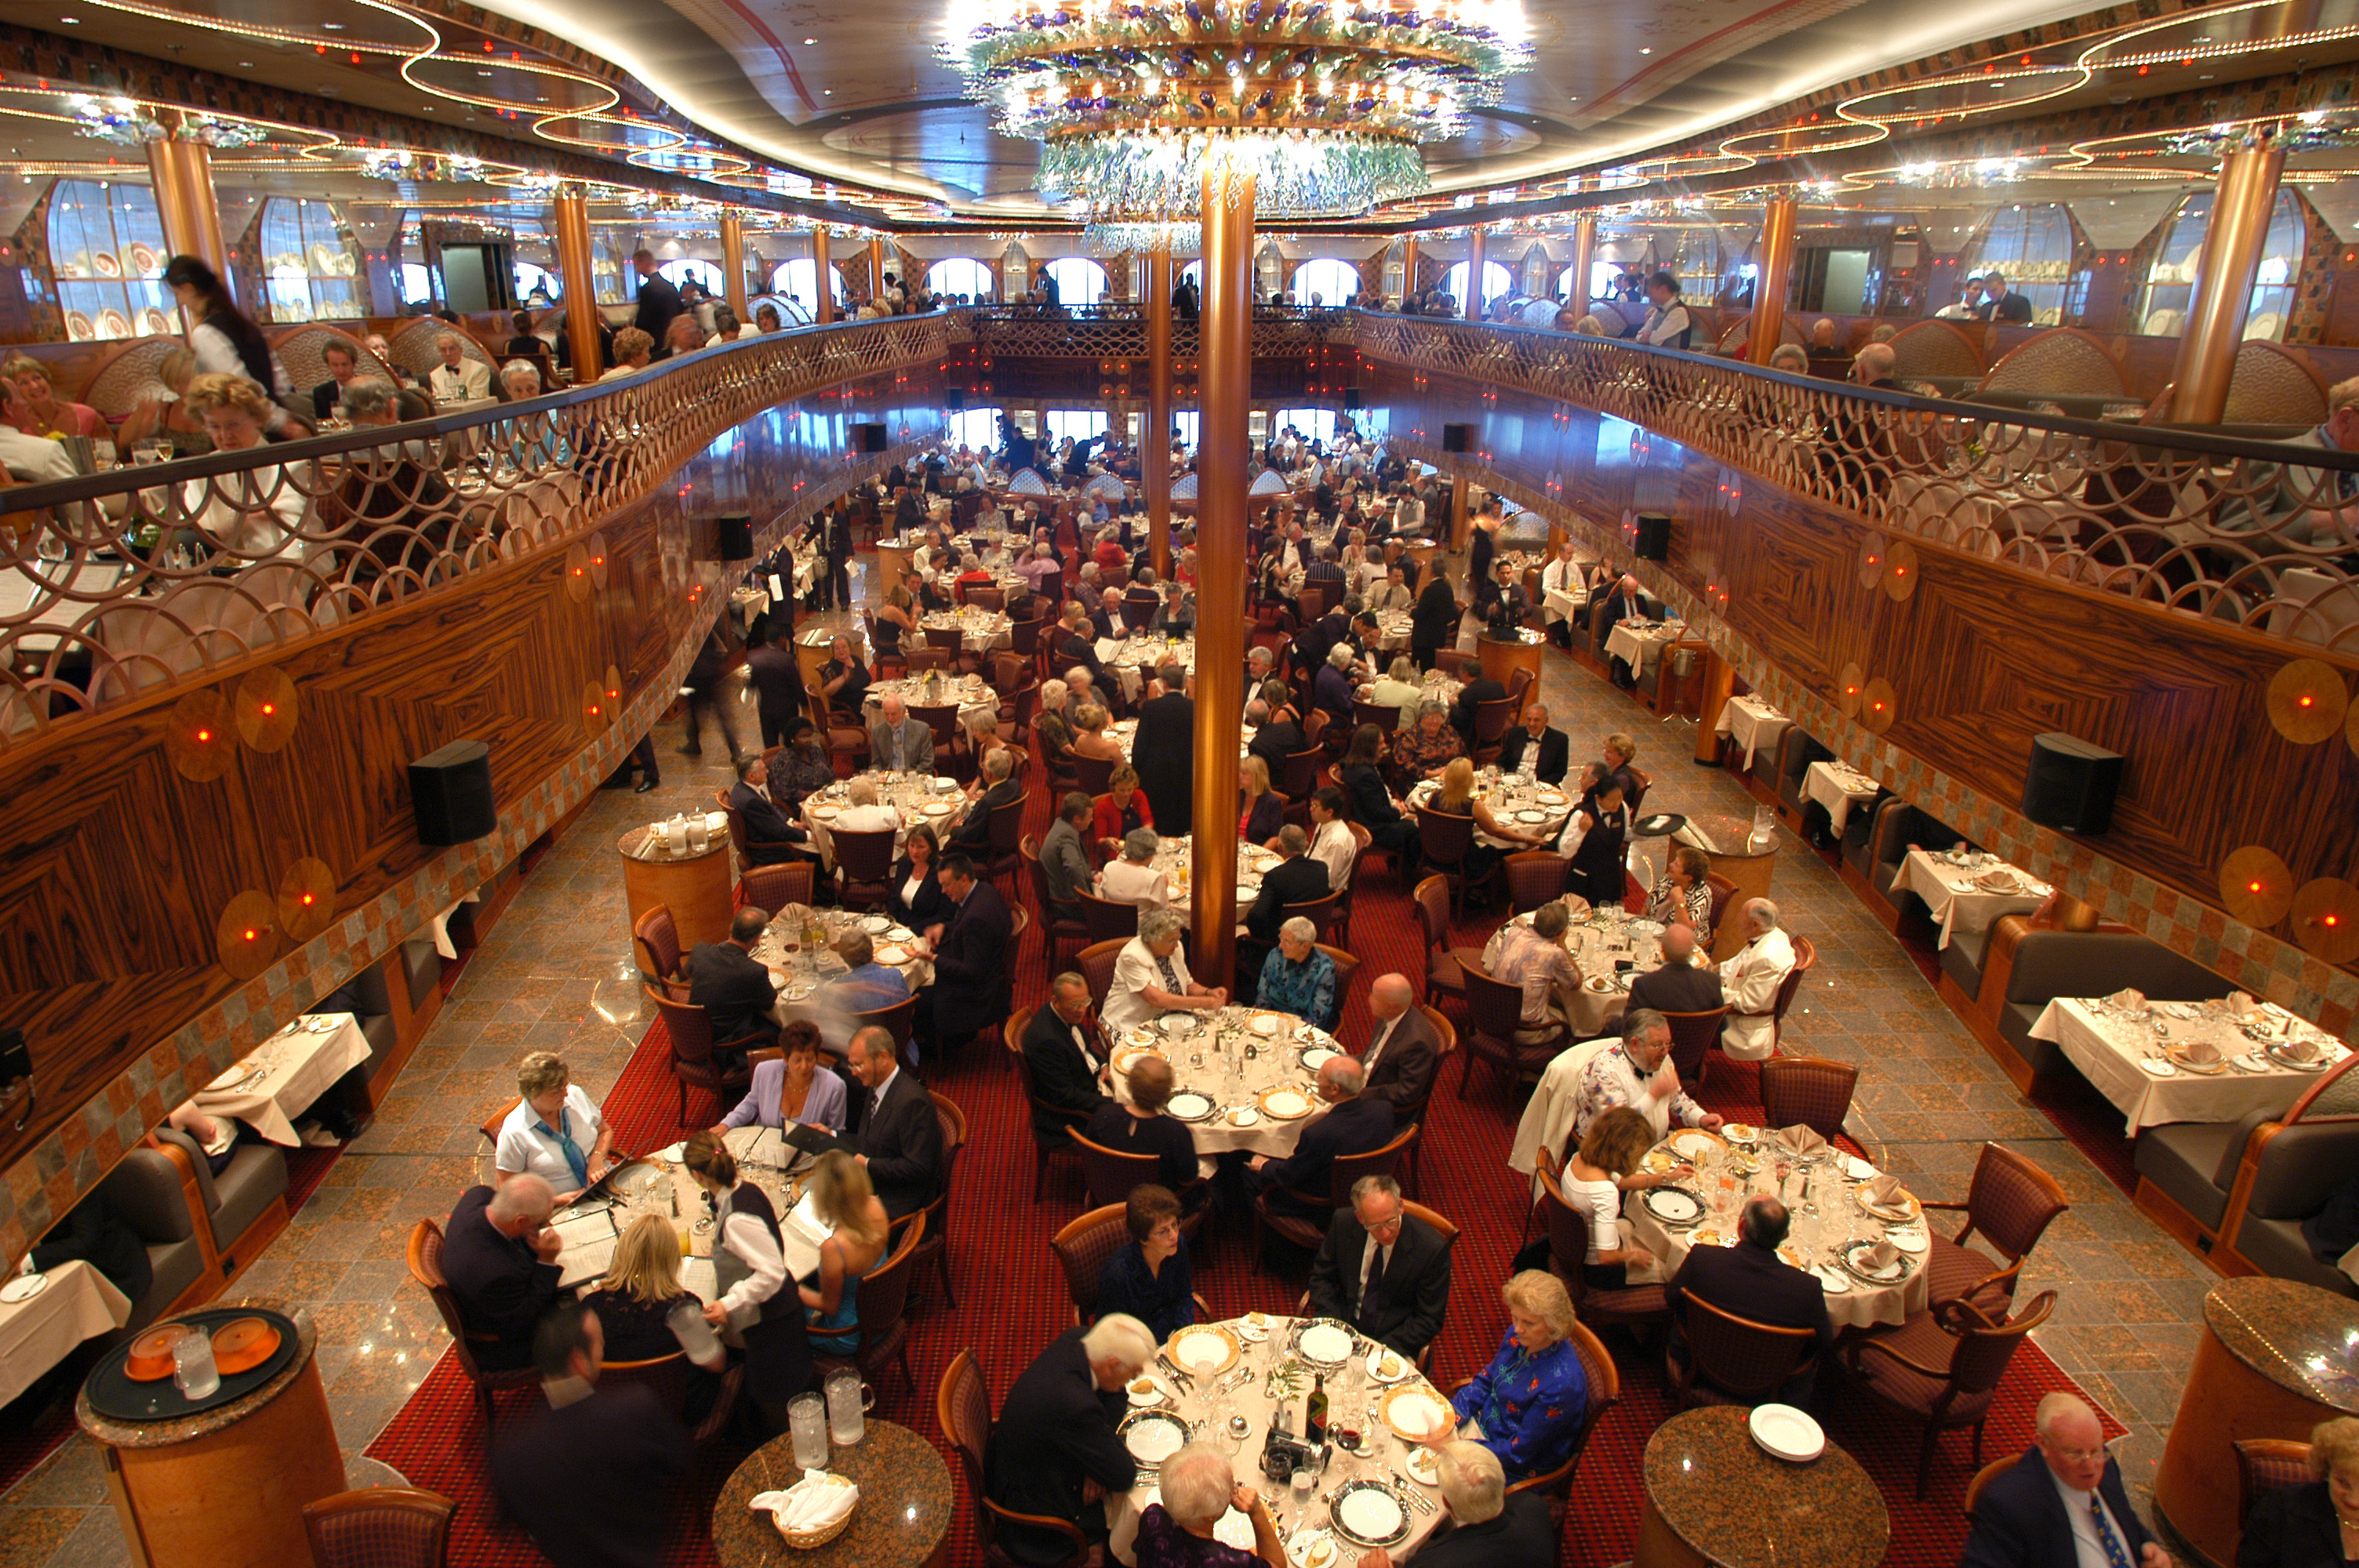 Cruise Etiquette: What's the Cruise Ship Dress Code These Days